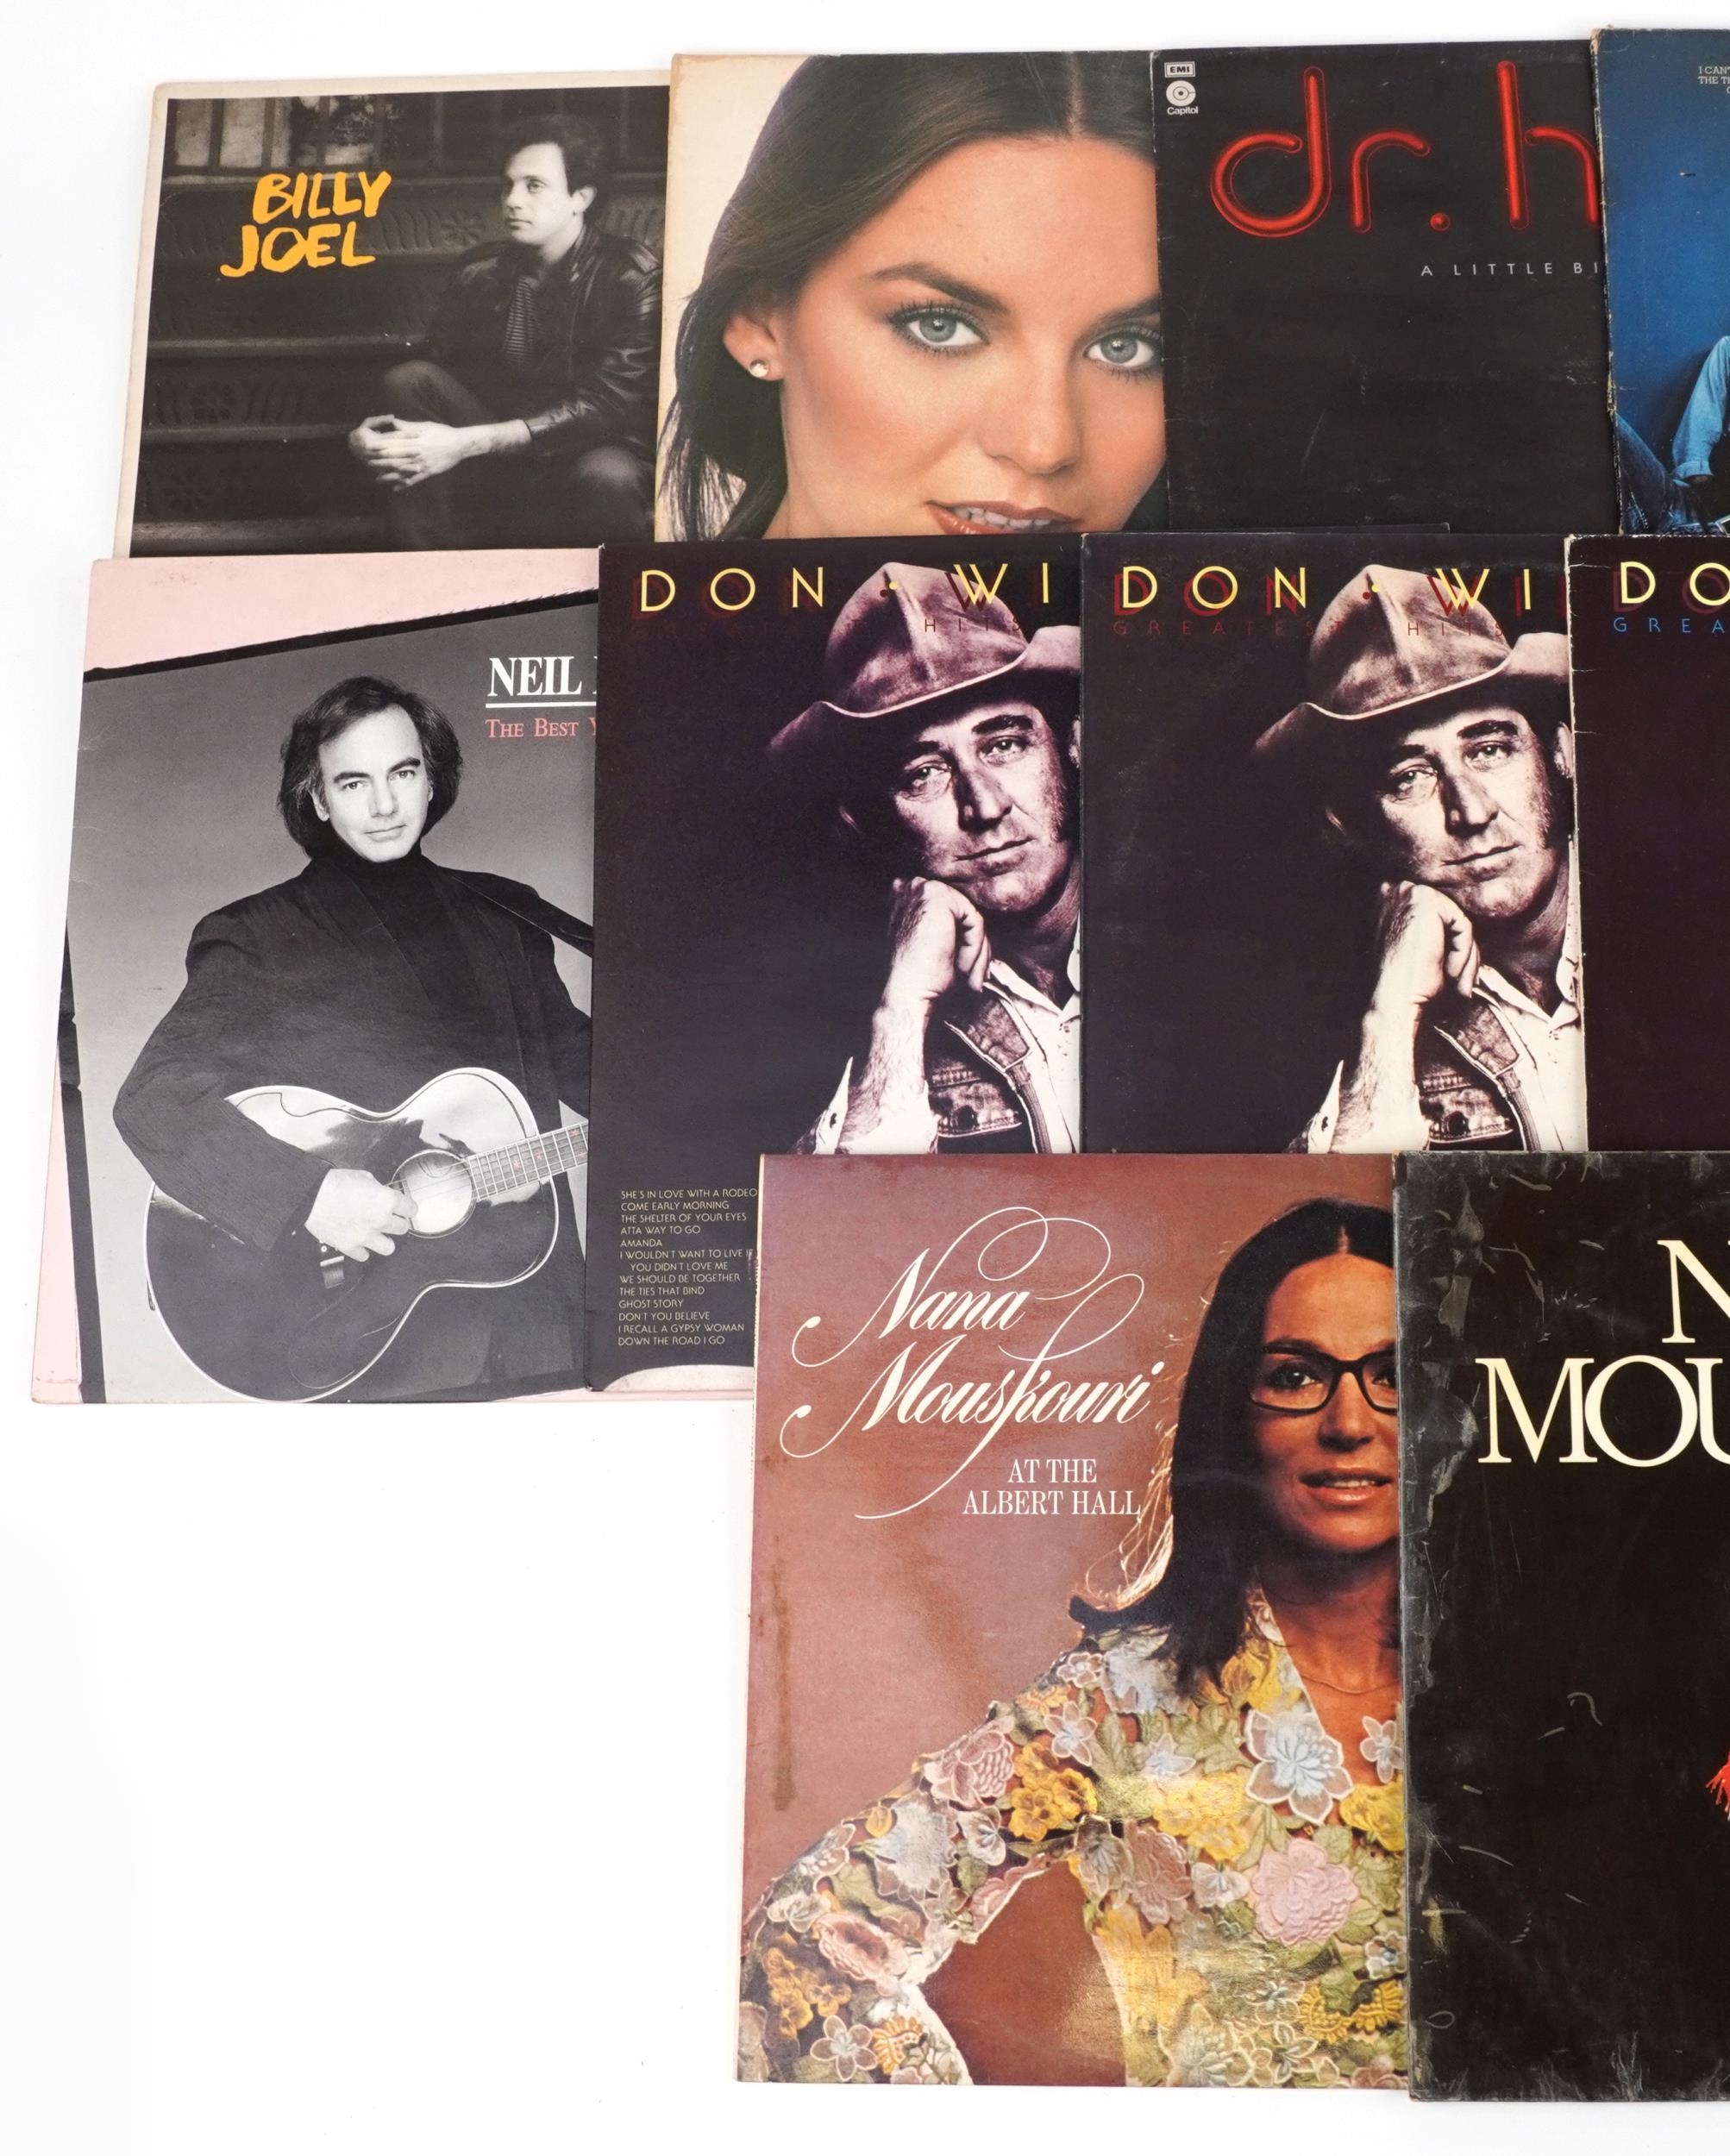 Vinyl LP records including Billy Joel, Dr Hook, Don Williams and Nana Mouskouri - Image 2 of 3